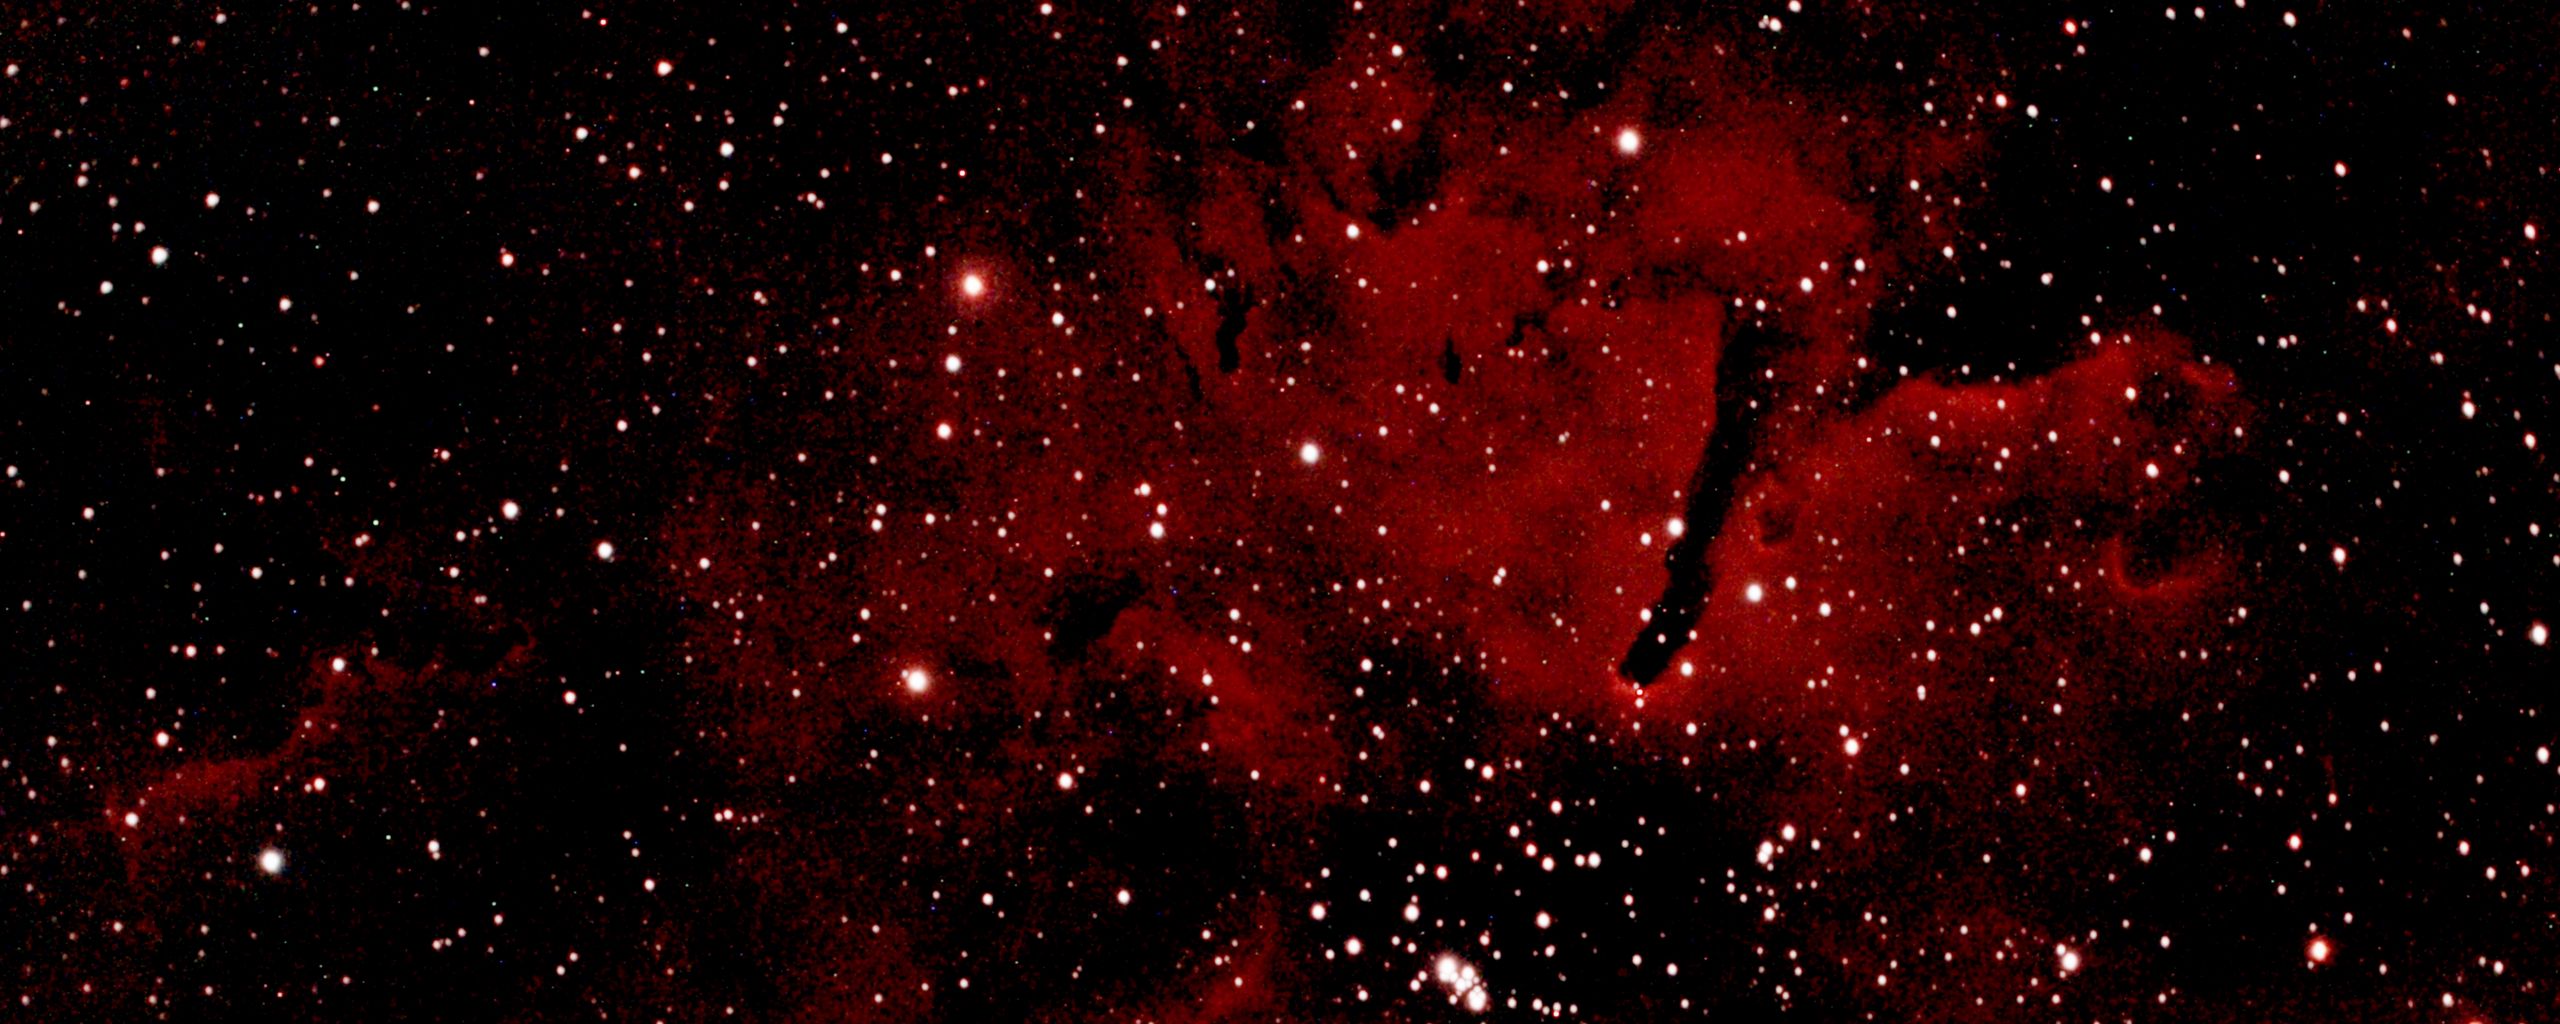 A red nebula with white stars on a black background - Crimson